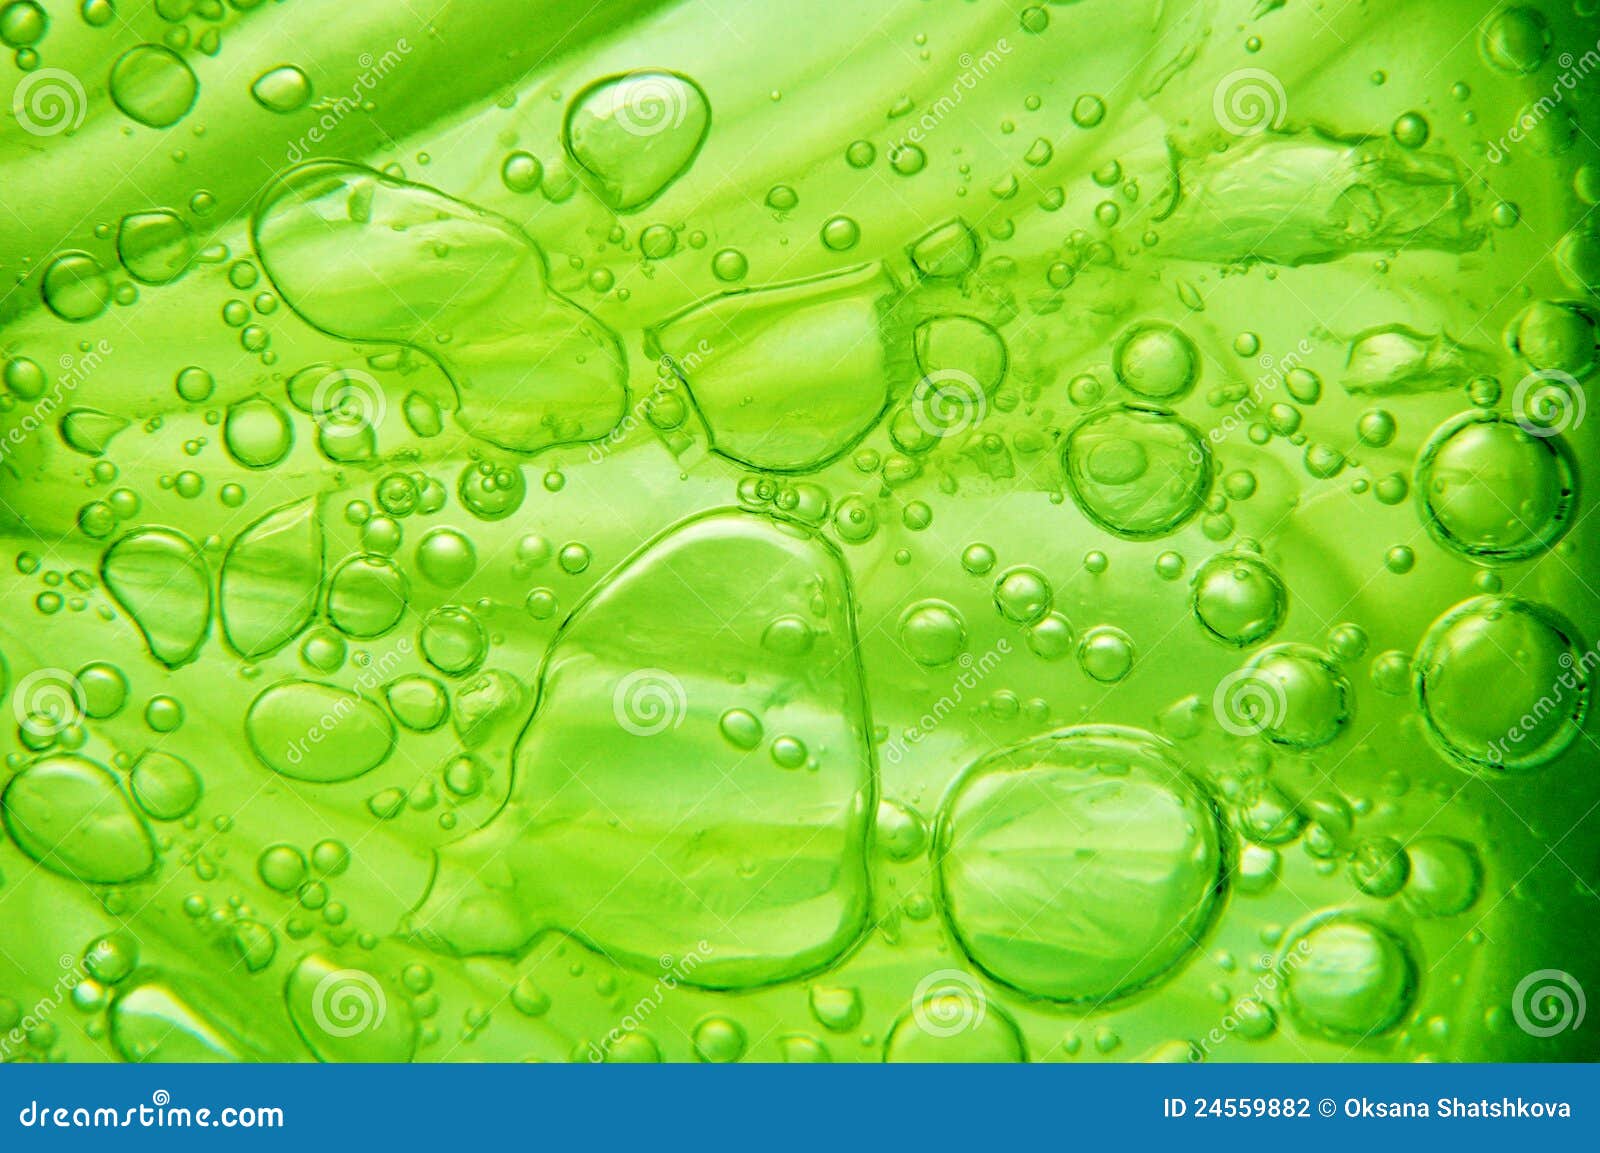 Lime with bubbles stock photo. Image of water, drink - 24559882